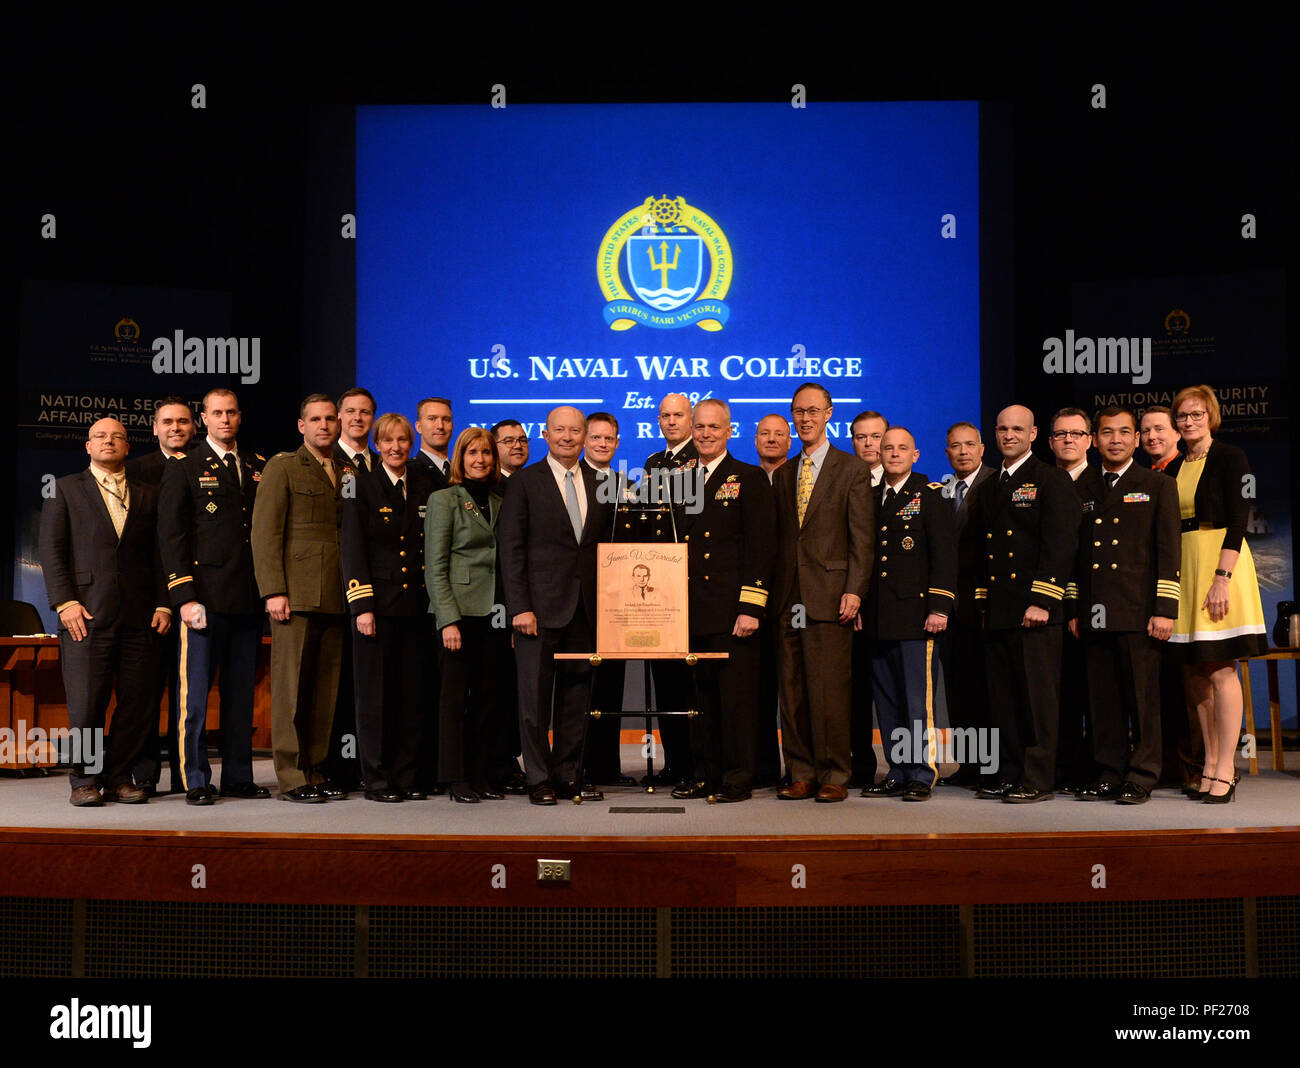 160226-N-PX557-214 NEWPORT, R.I. (Feb. 26, 2016) Rear Adm. P. Gardner Howe III, president, U.S. Naval War College (NWC), presents the James V. Forrestal Award for Excellence in Force Planning to top graduates of the 2016 National Security Decision Making (NSDM) course. The 10-week NSDM course is part of NWC's yearlong resident program and is designed to prepare senior level joint and international officers and civilians for executive positions in large national security organizations.   (U.S. Navy photo by Chief Mass Communication Specialist James E. Foehl/Released) Stock Photo